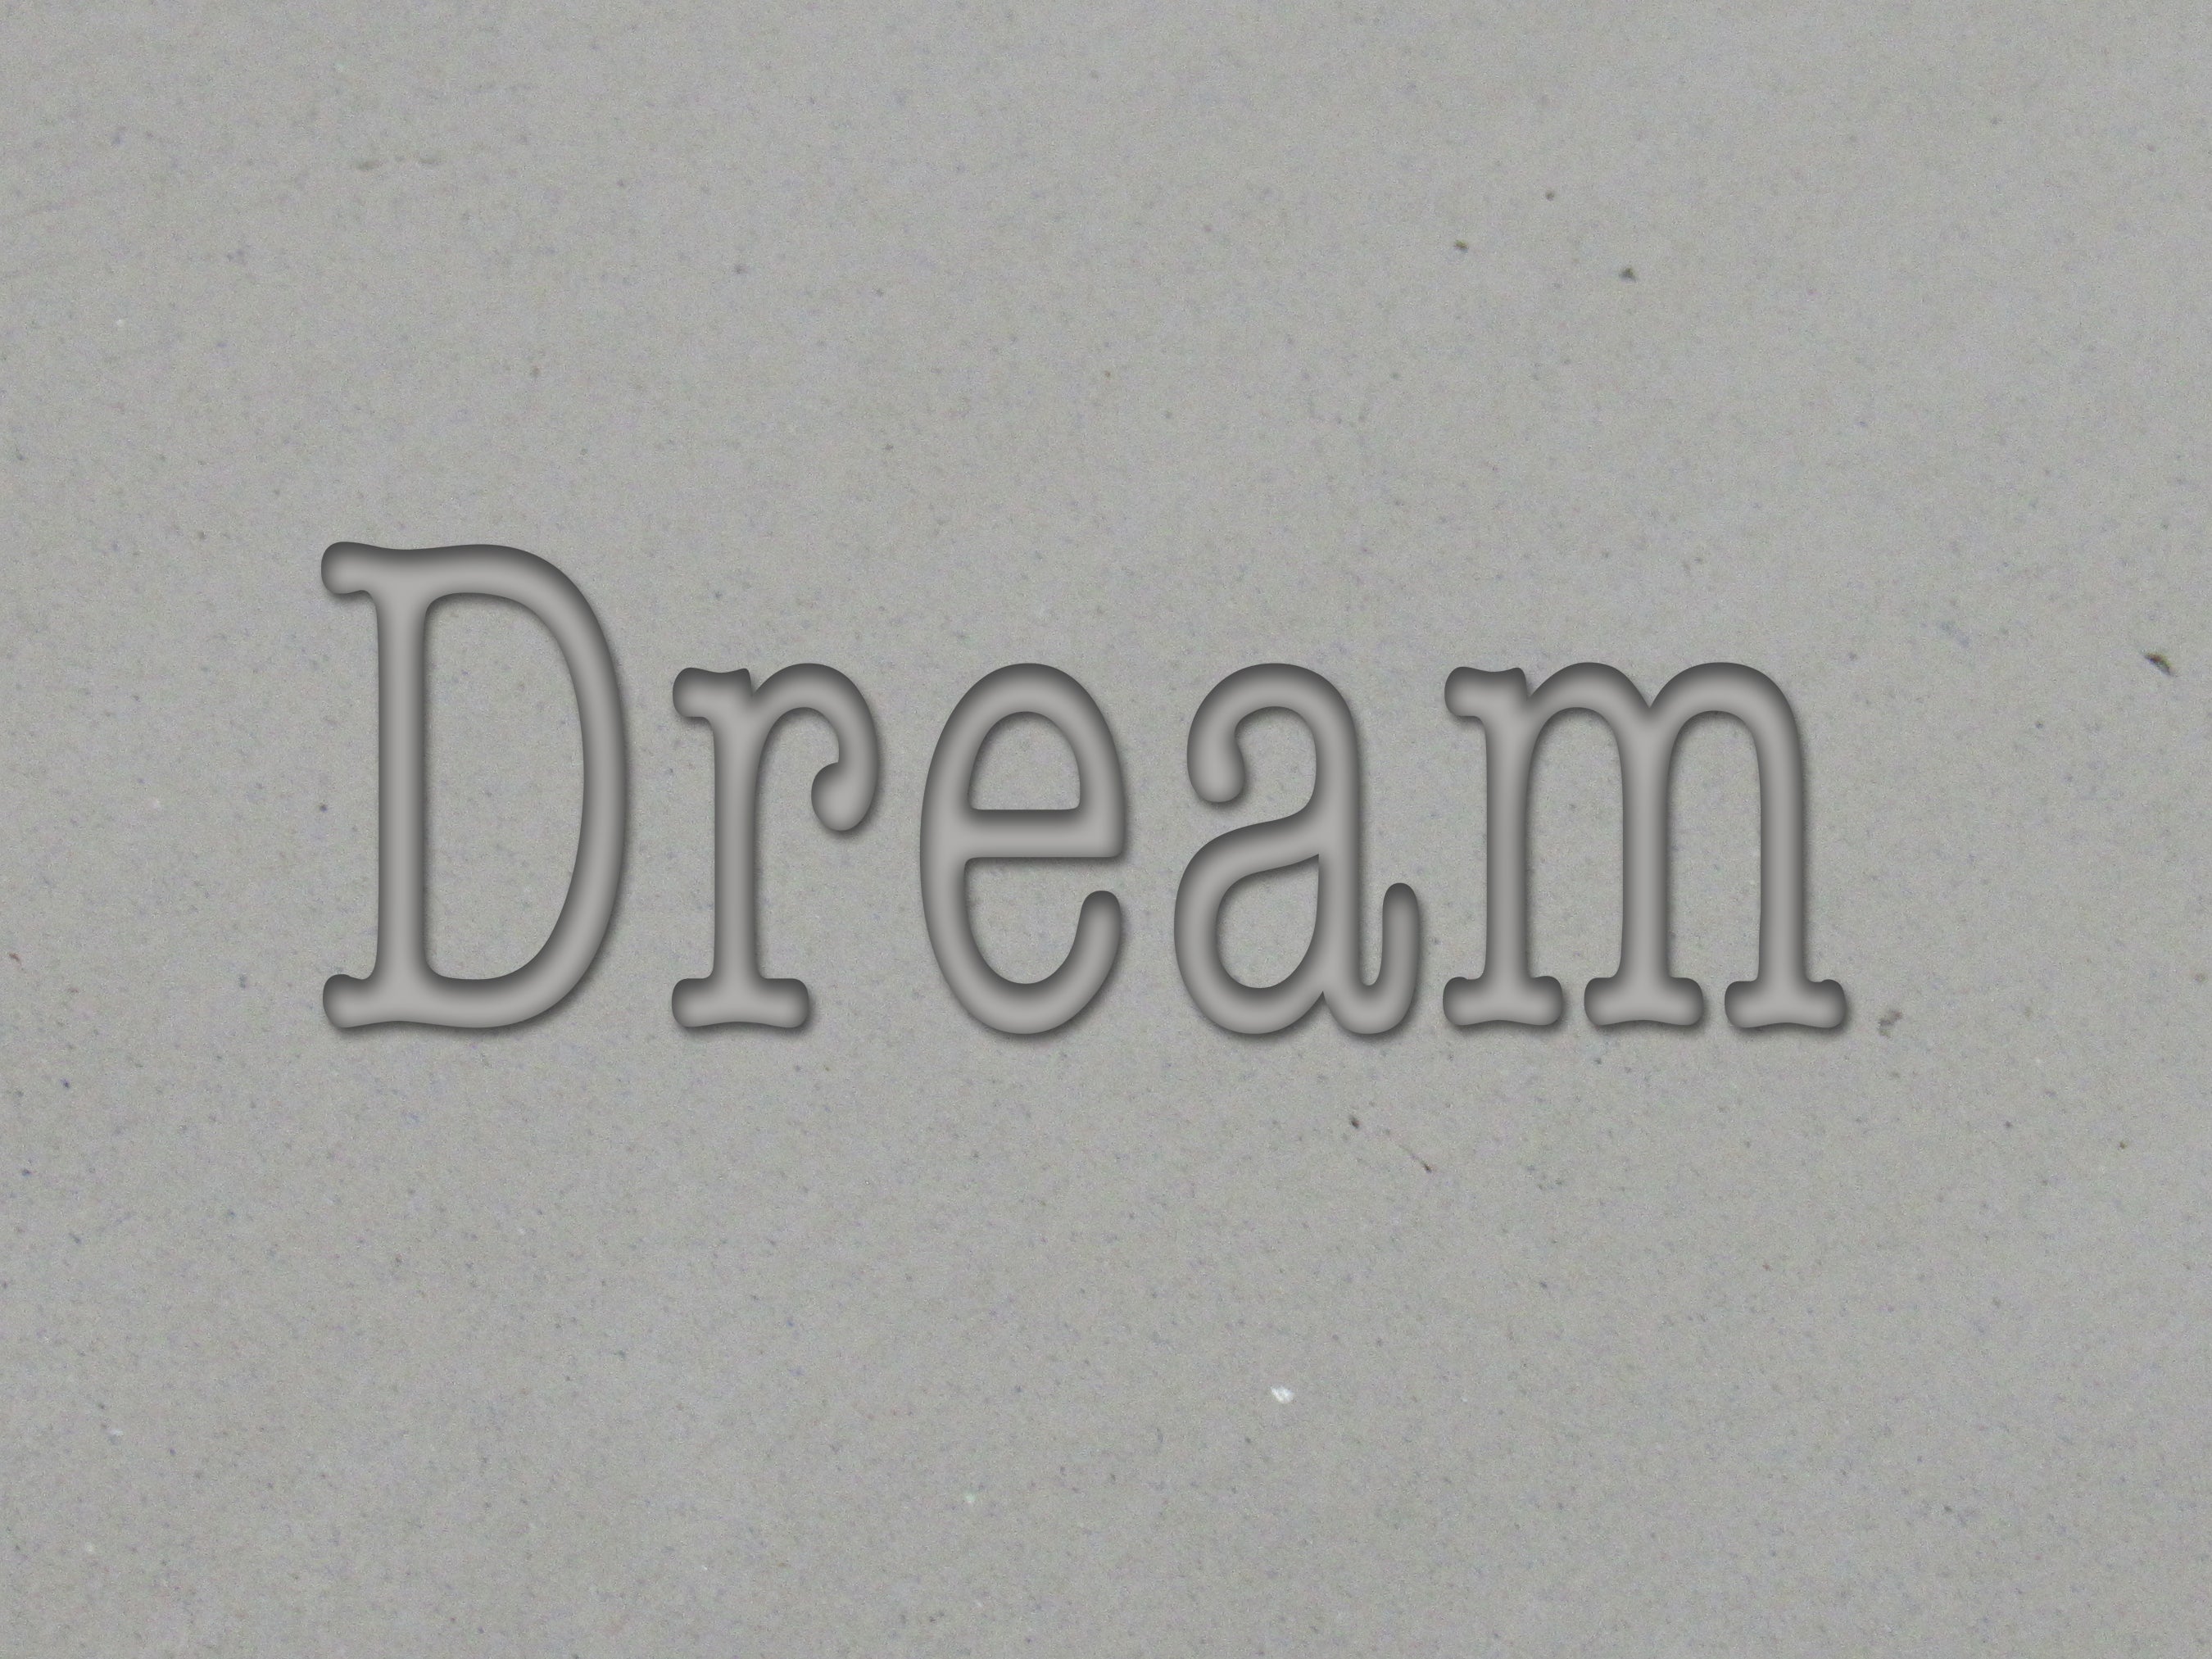 Inspirational "Dream" pottery stamp, clay stamp for slab built pottery mugs